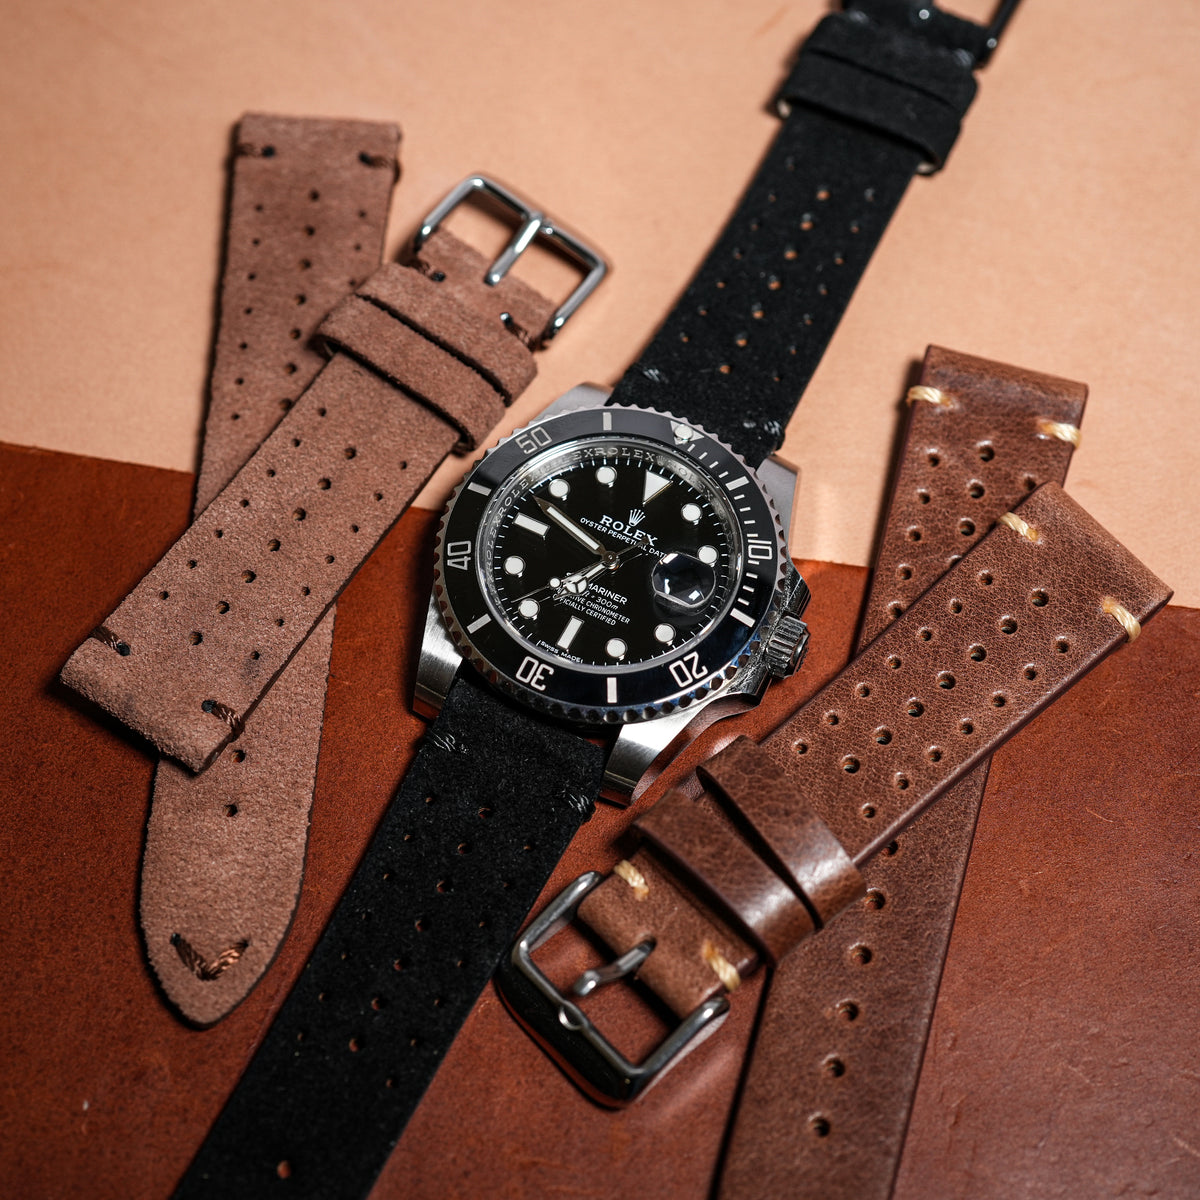 Premium Rally Suede Leather Watch Strap in Black - Nomad Watch Works MY